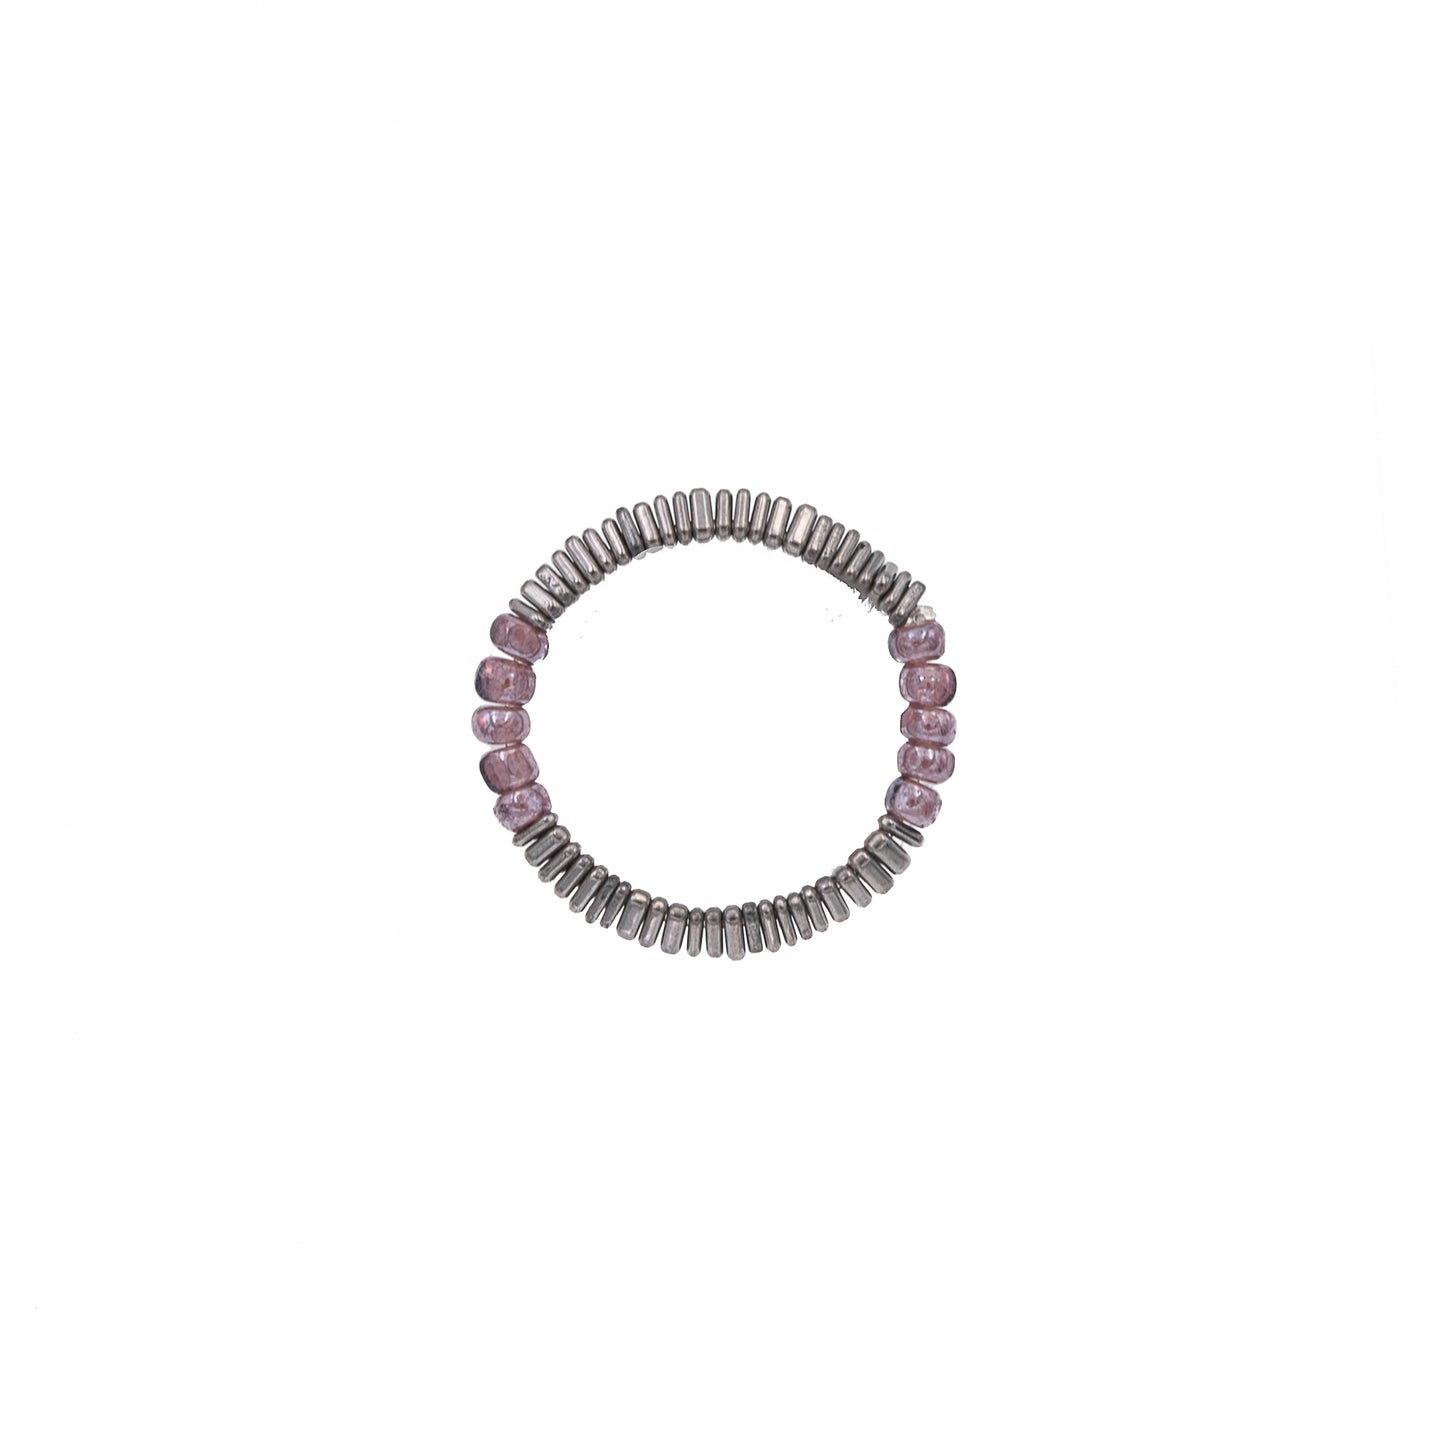 Zurina Ketola Beaded Stretch Ring with Purple Seed Beads and Tiny Triangle Hematite Details on White Background. 